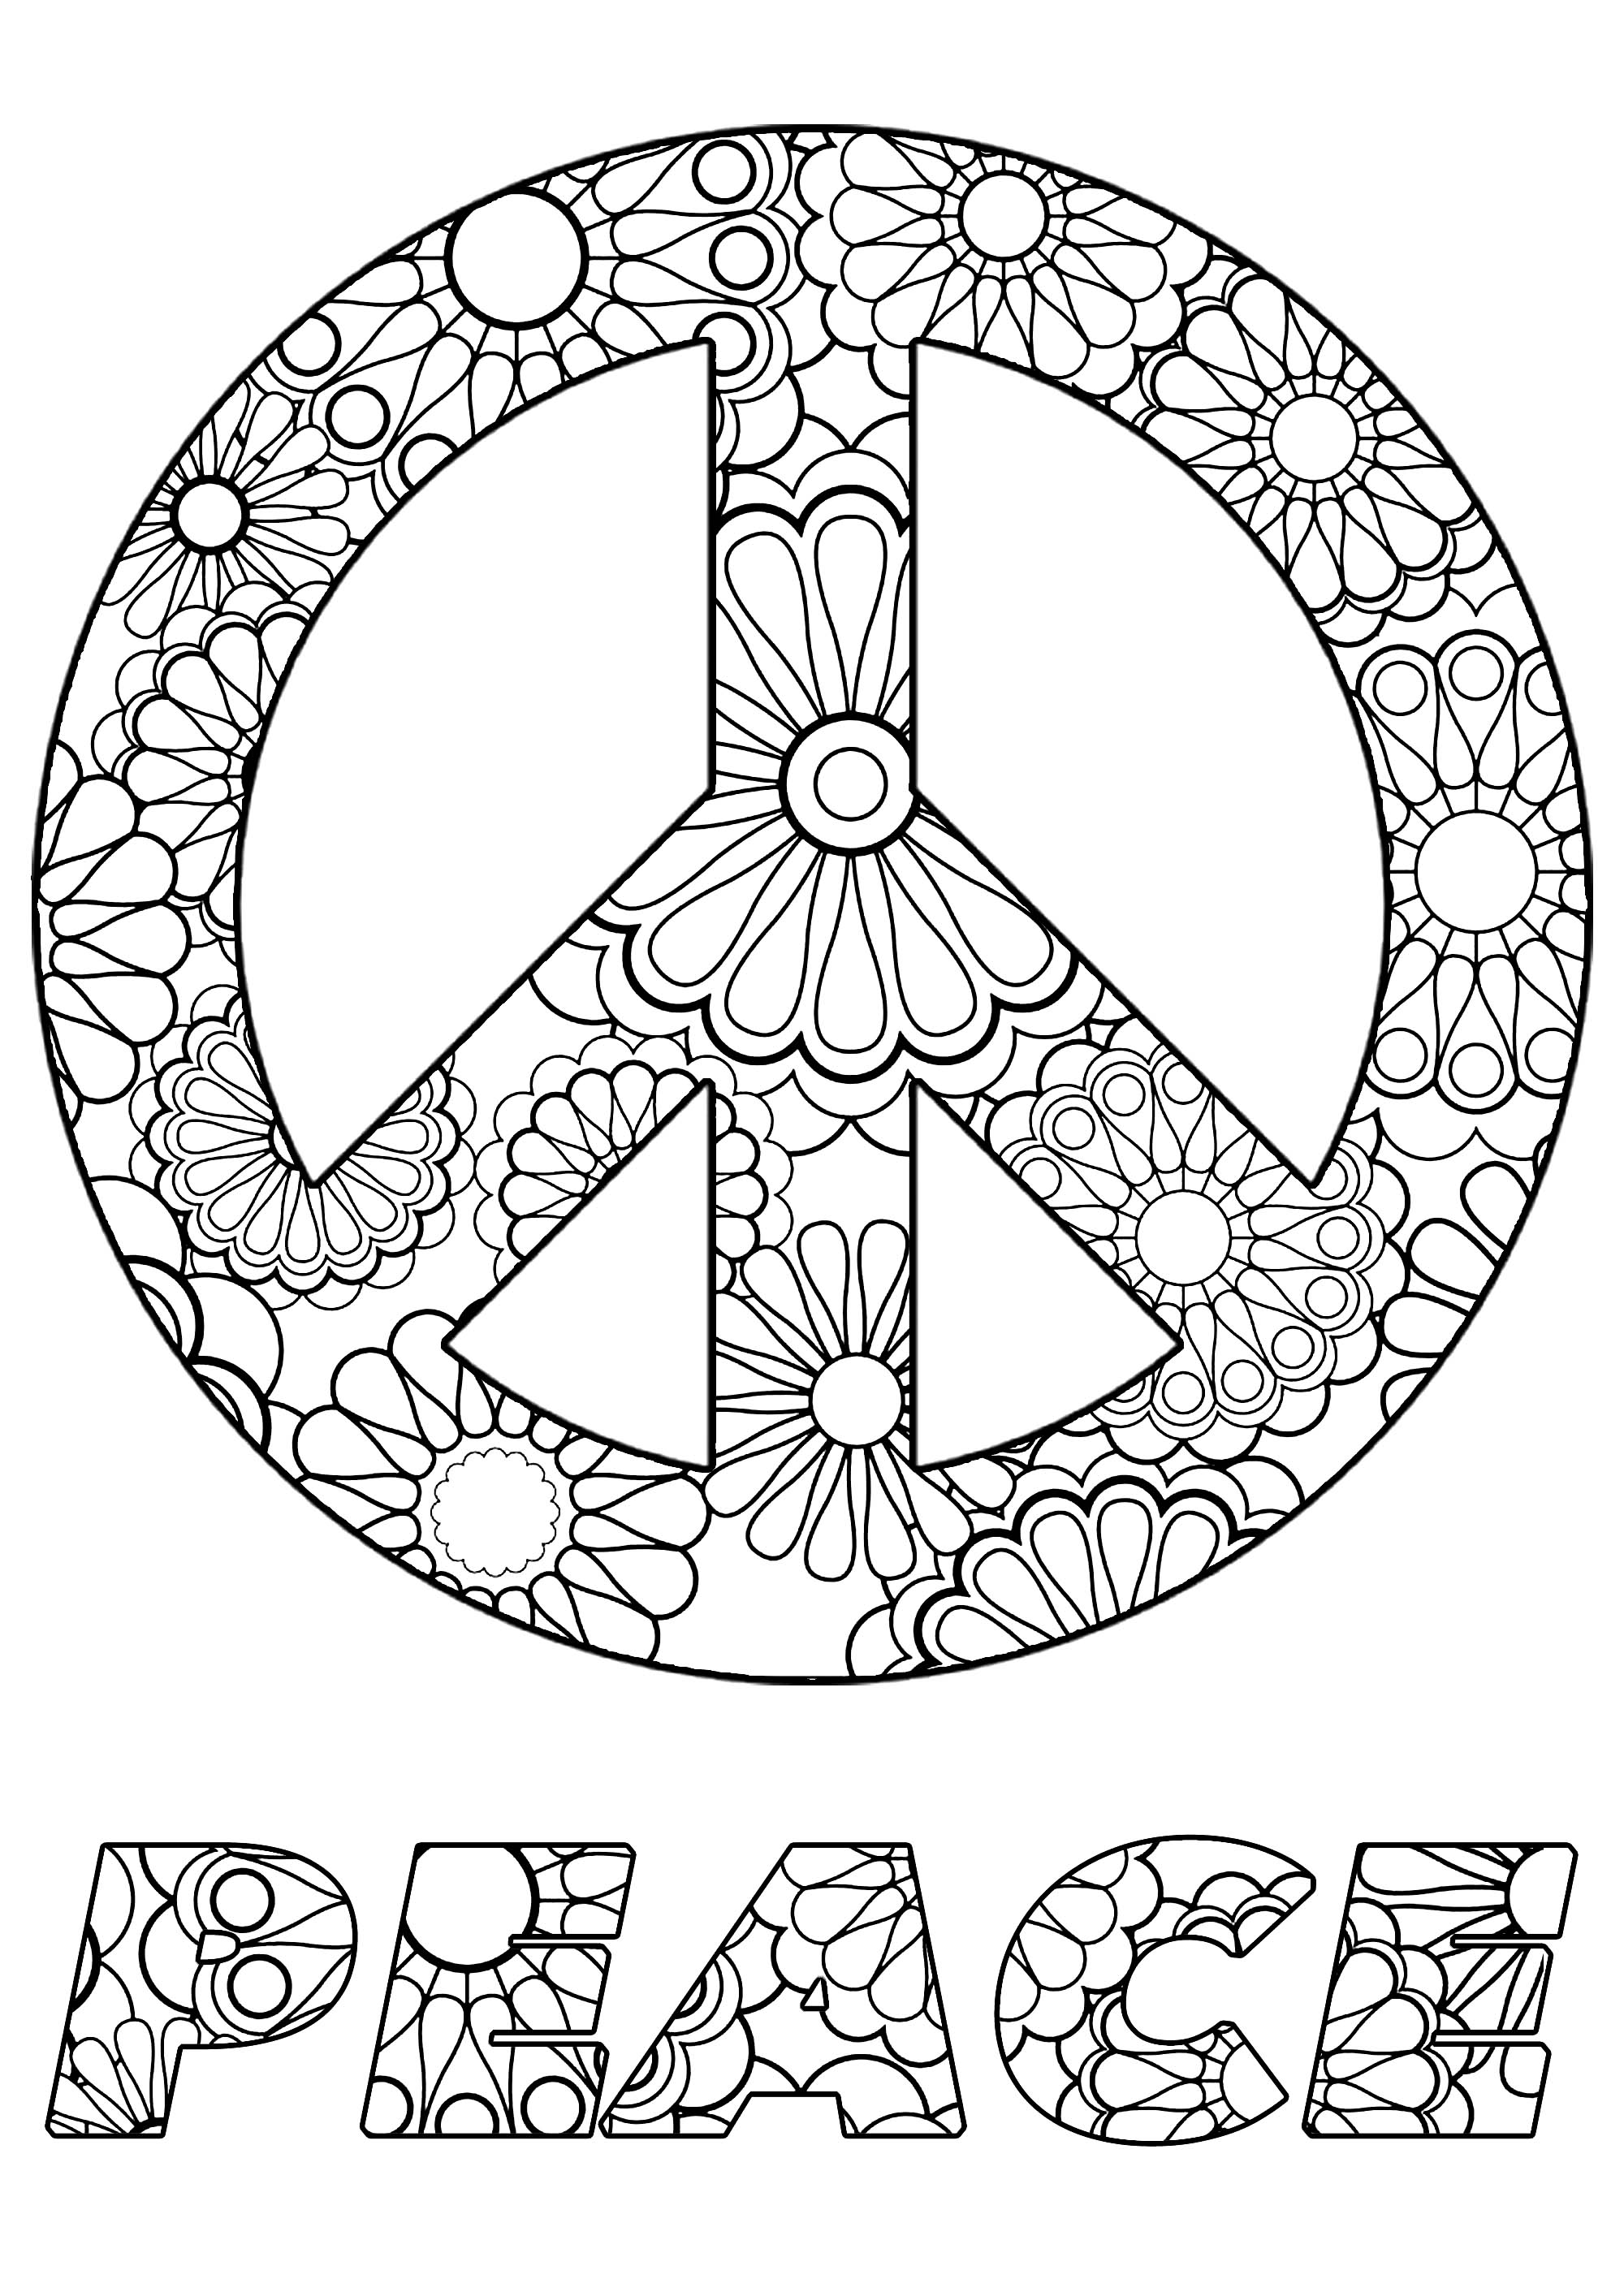 Color the Peace symbol and text, with beautiful flowers inside, Artist : Art. Isabelle